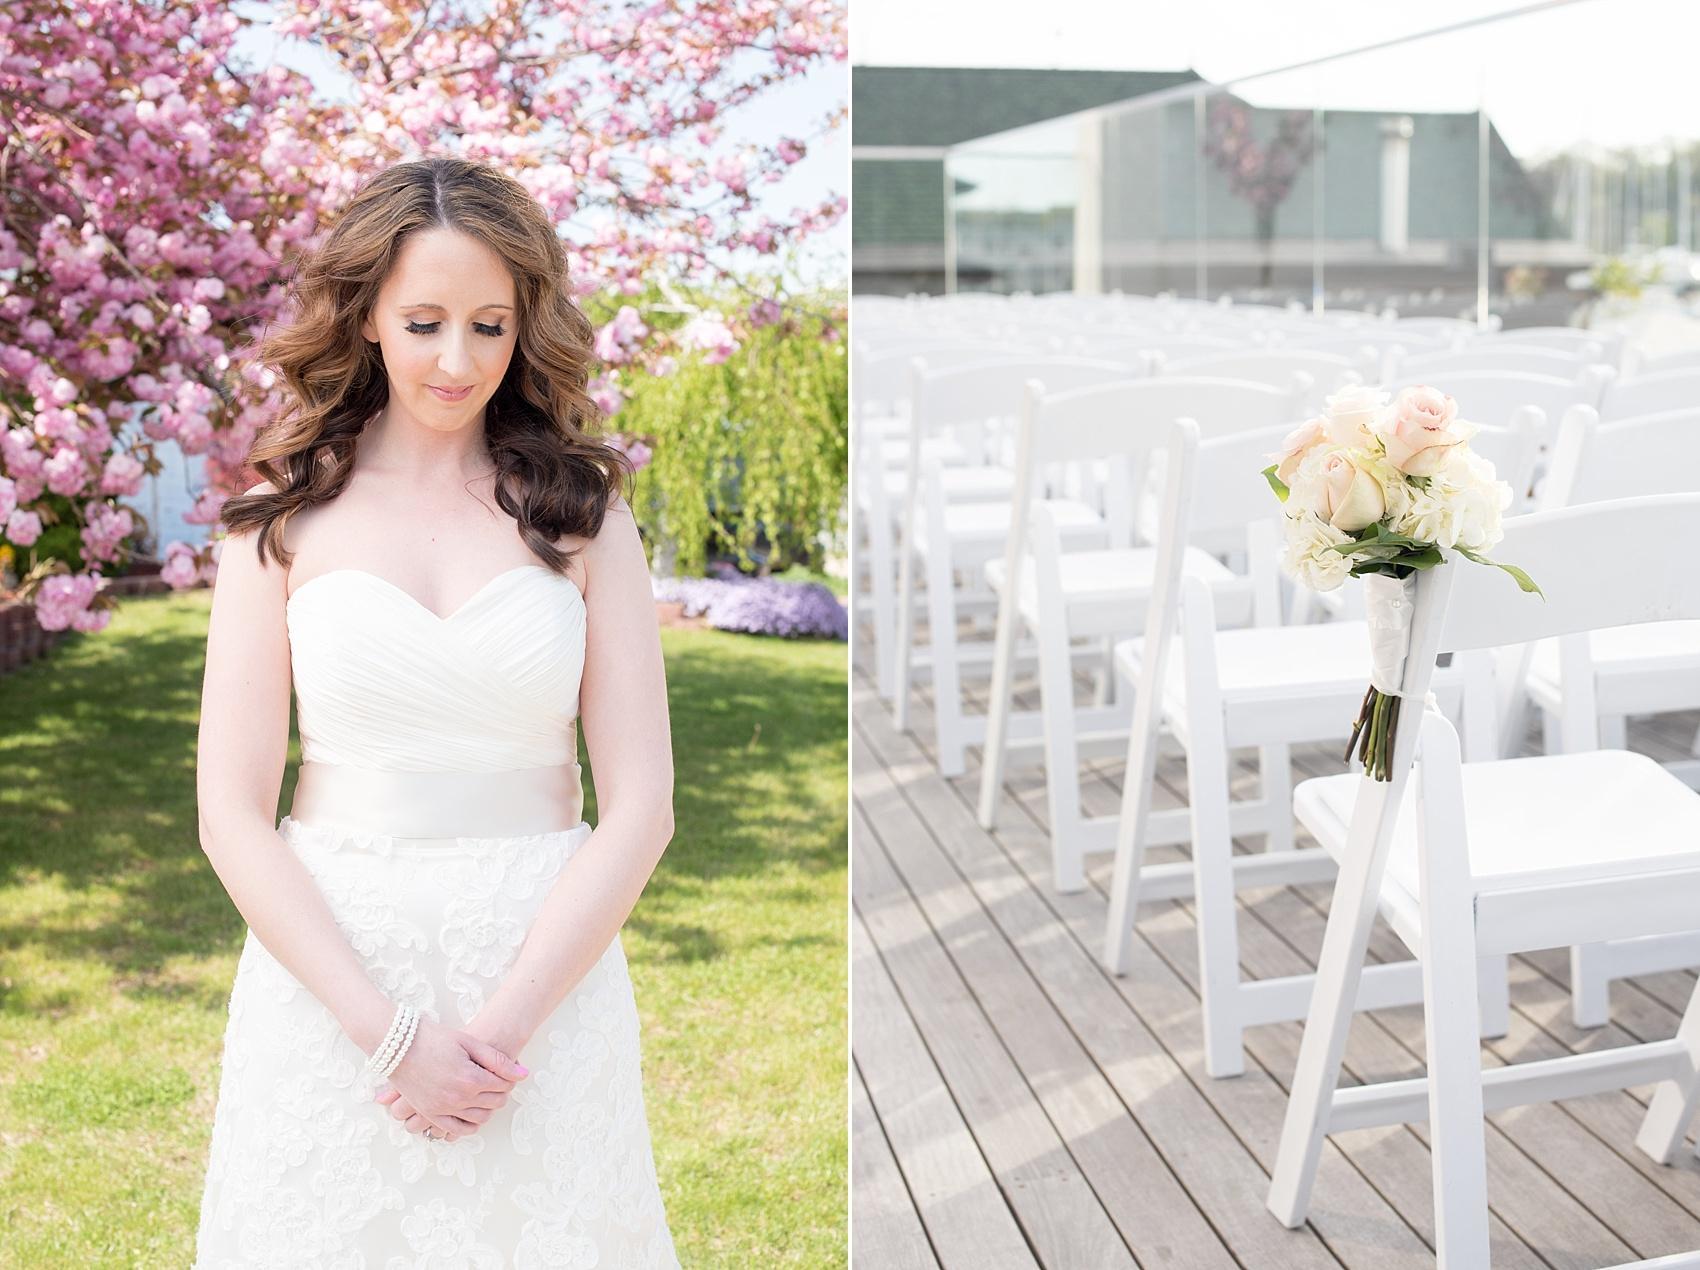 Photos by Mikkel Paige Photography for a wedding at Harbor Club on Long Island. Waterfront ceremony and spring bridal images with cherry blossoms.